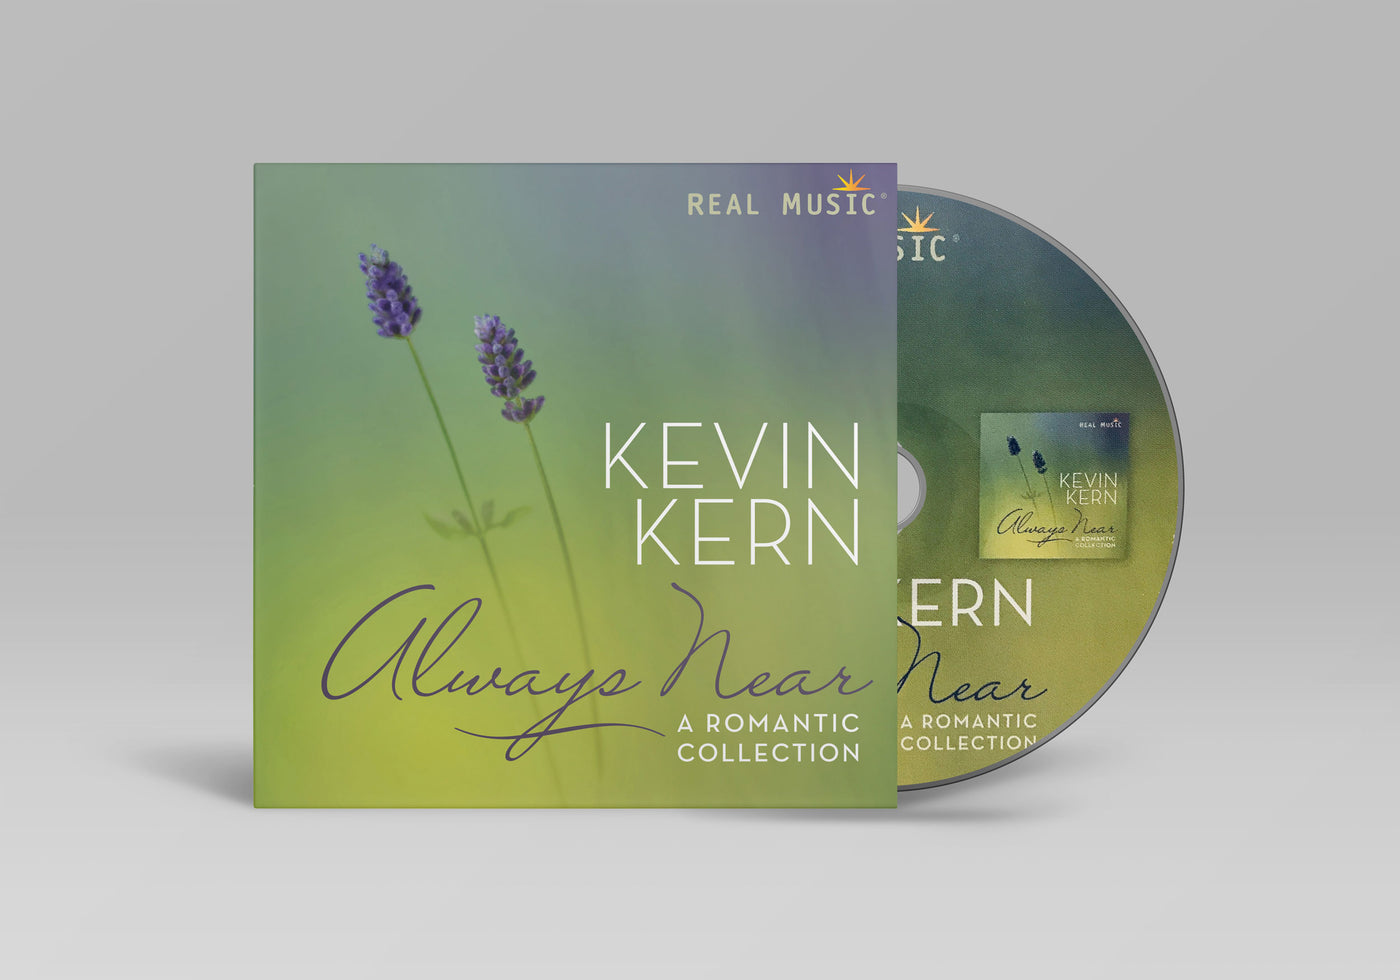 Always Near by Kevin Kern, cd and cover.